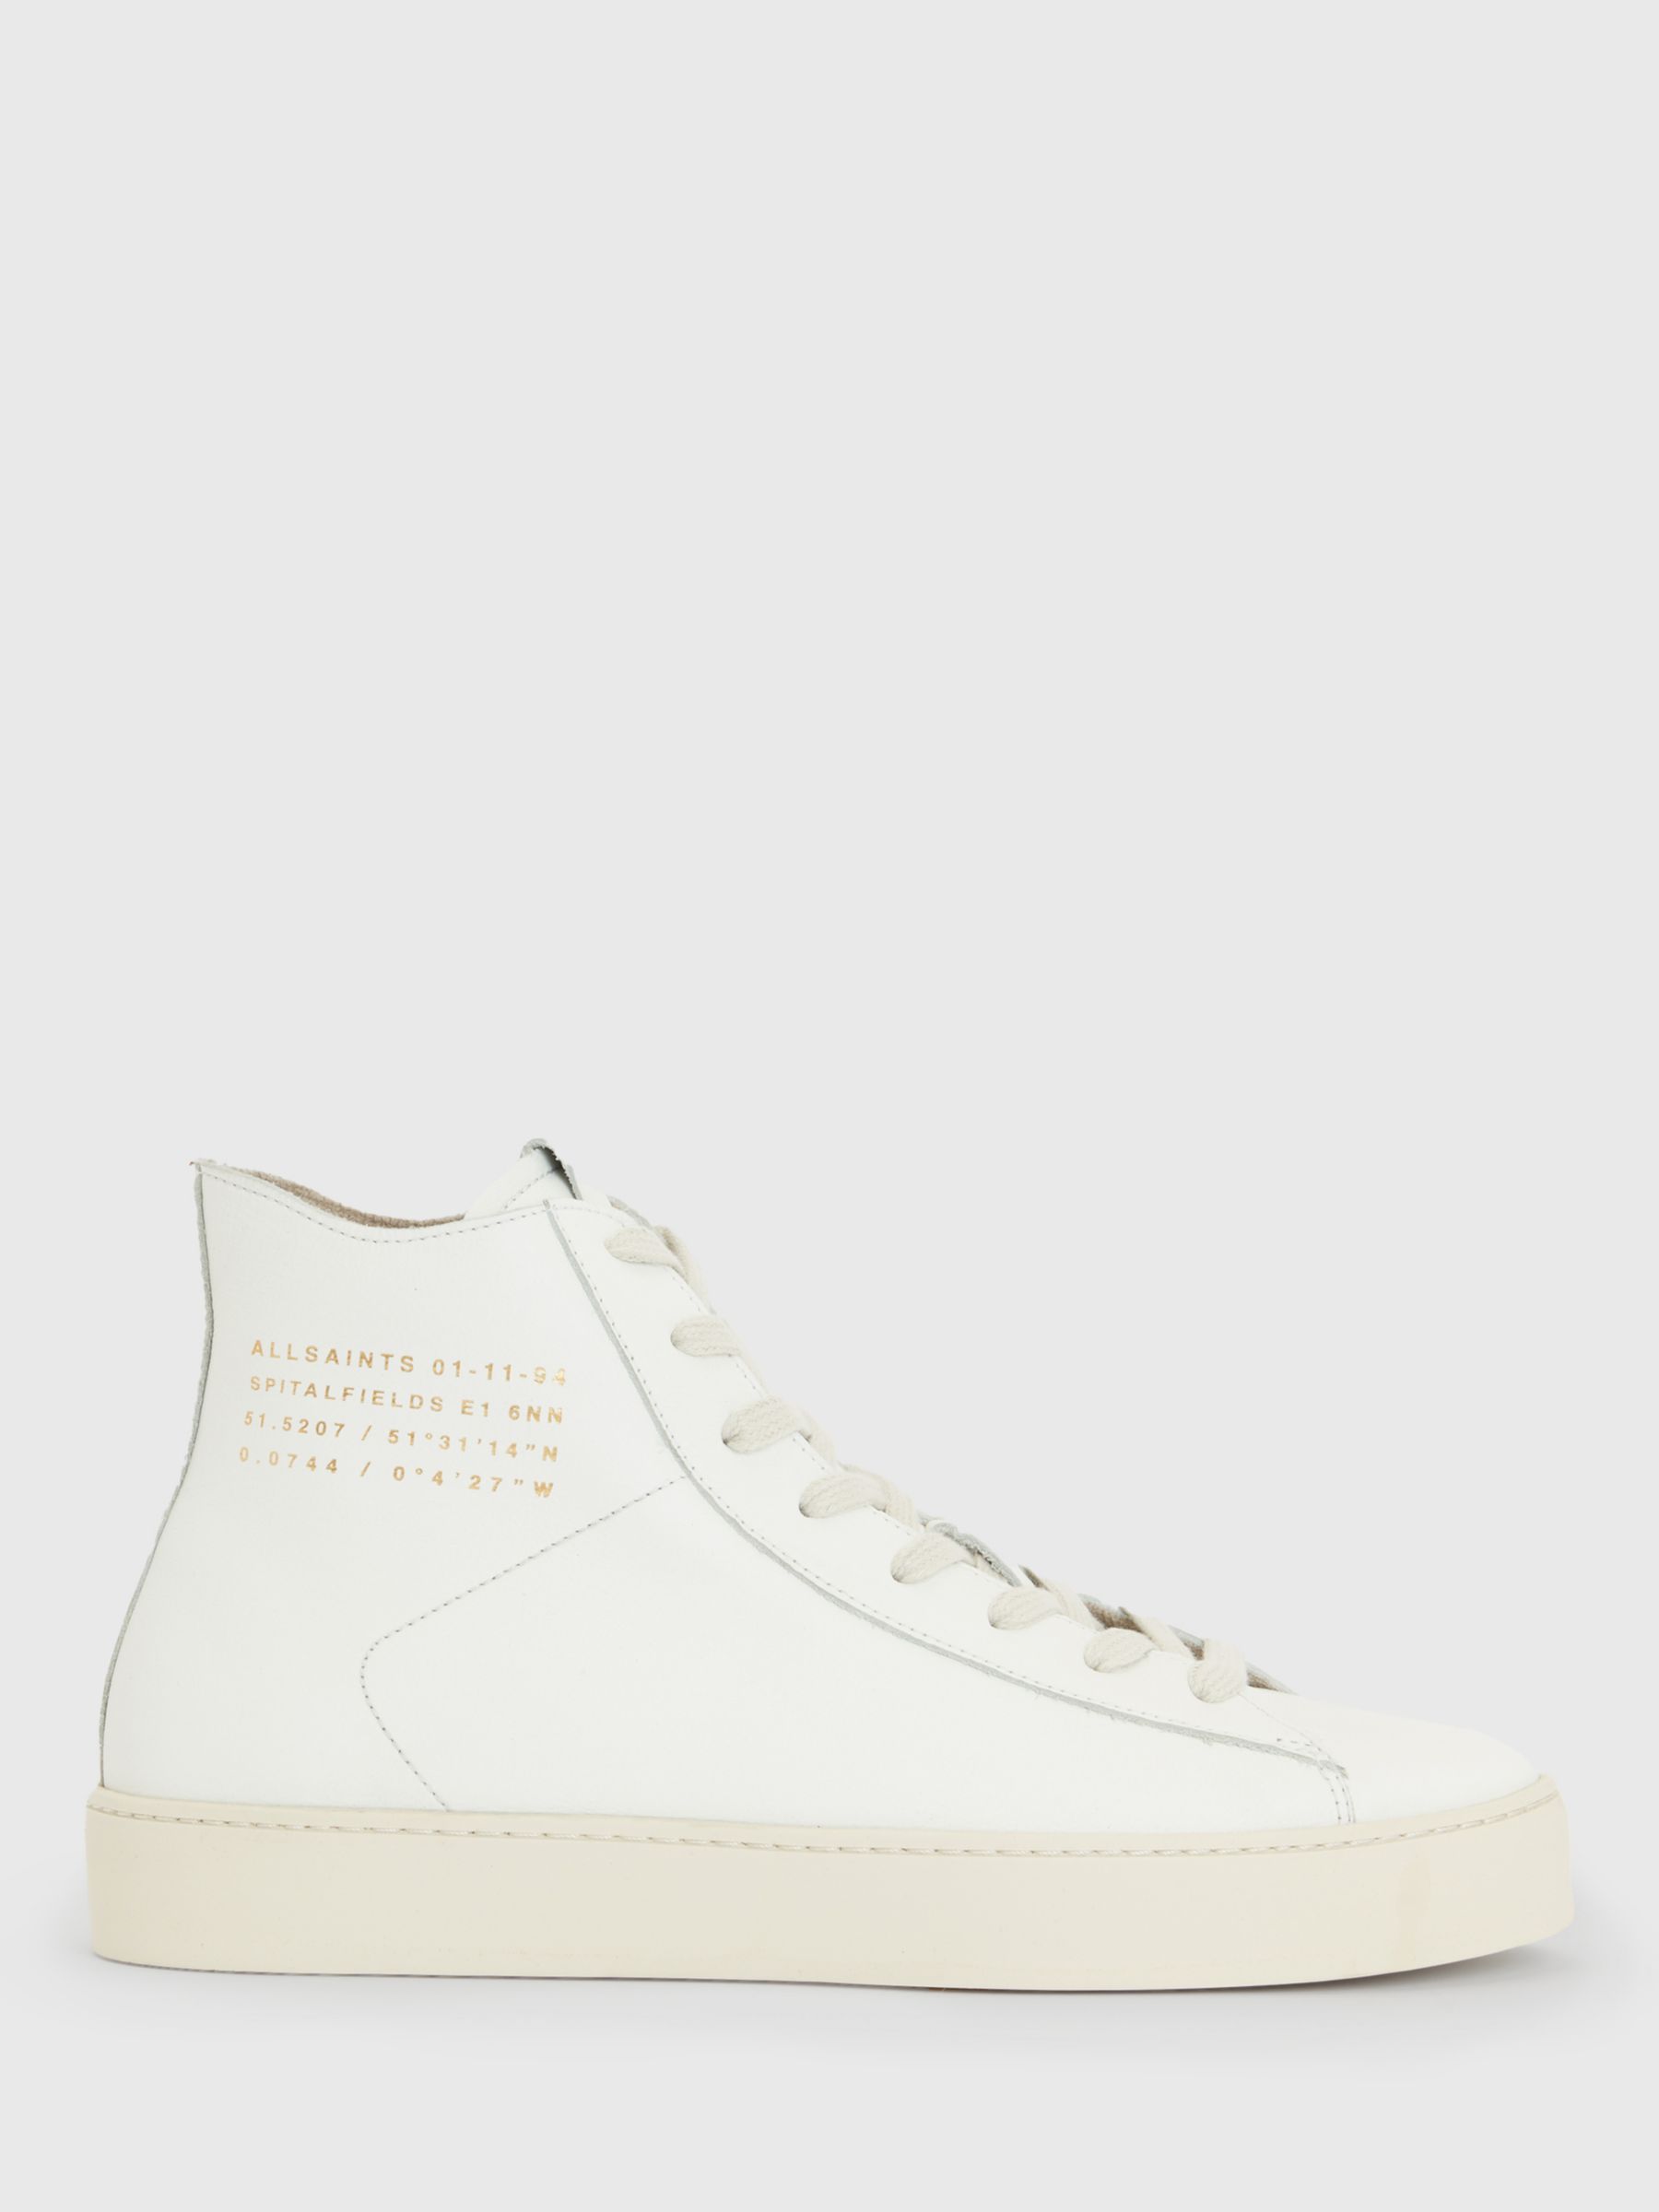 AllSaints Tana Leather Hi-Top Trainers, White at John Lewis & Partners